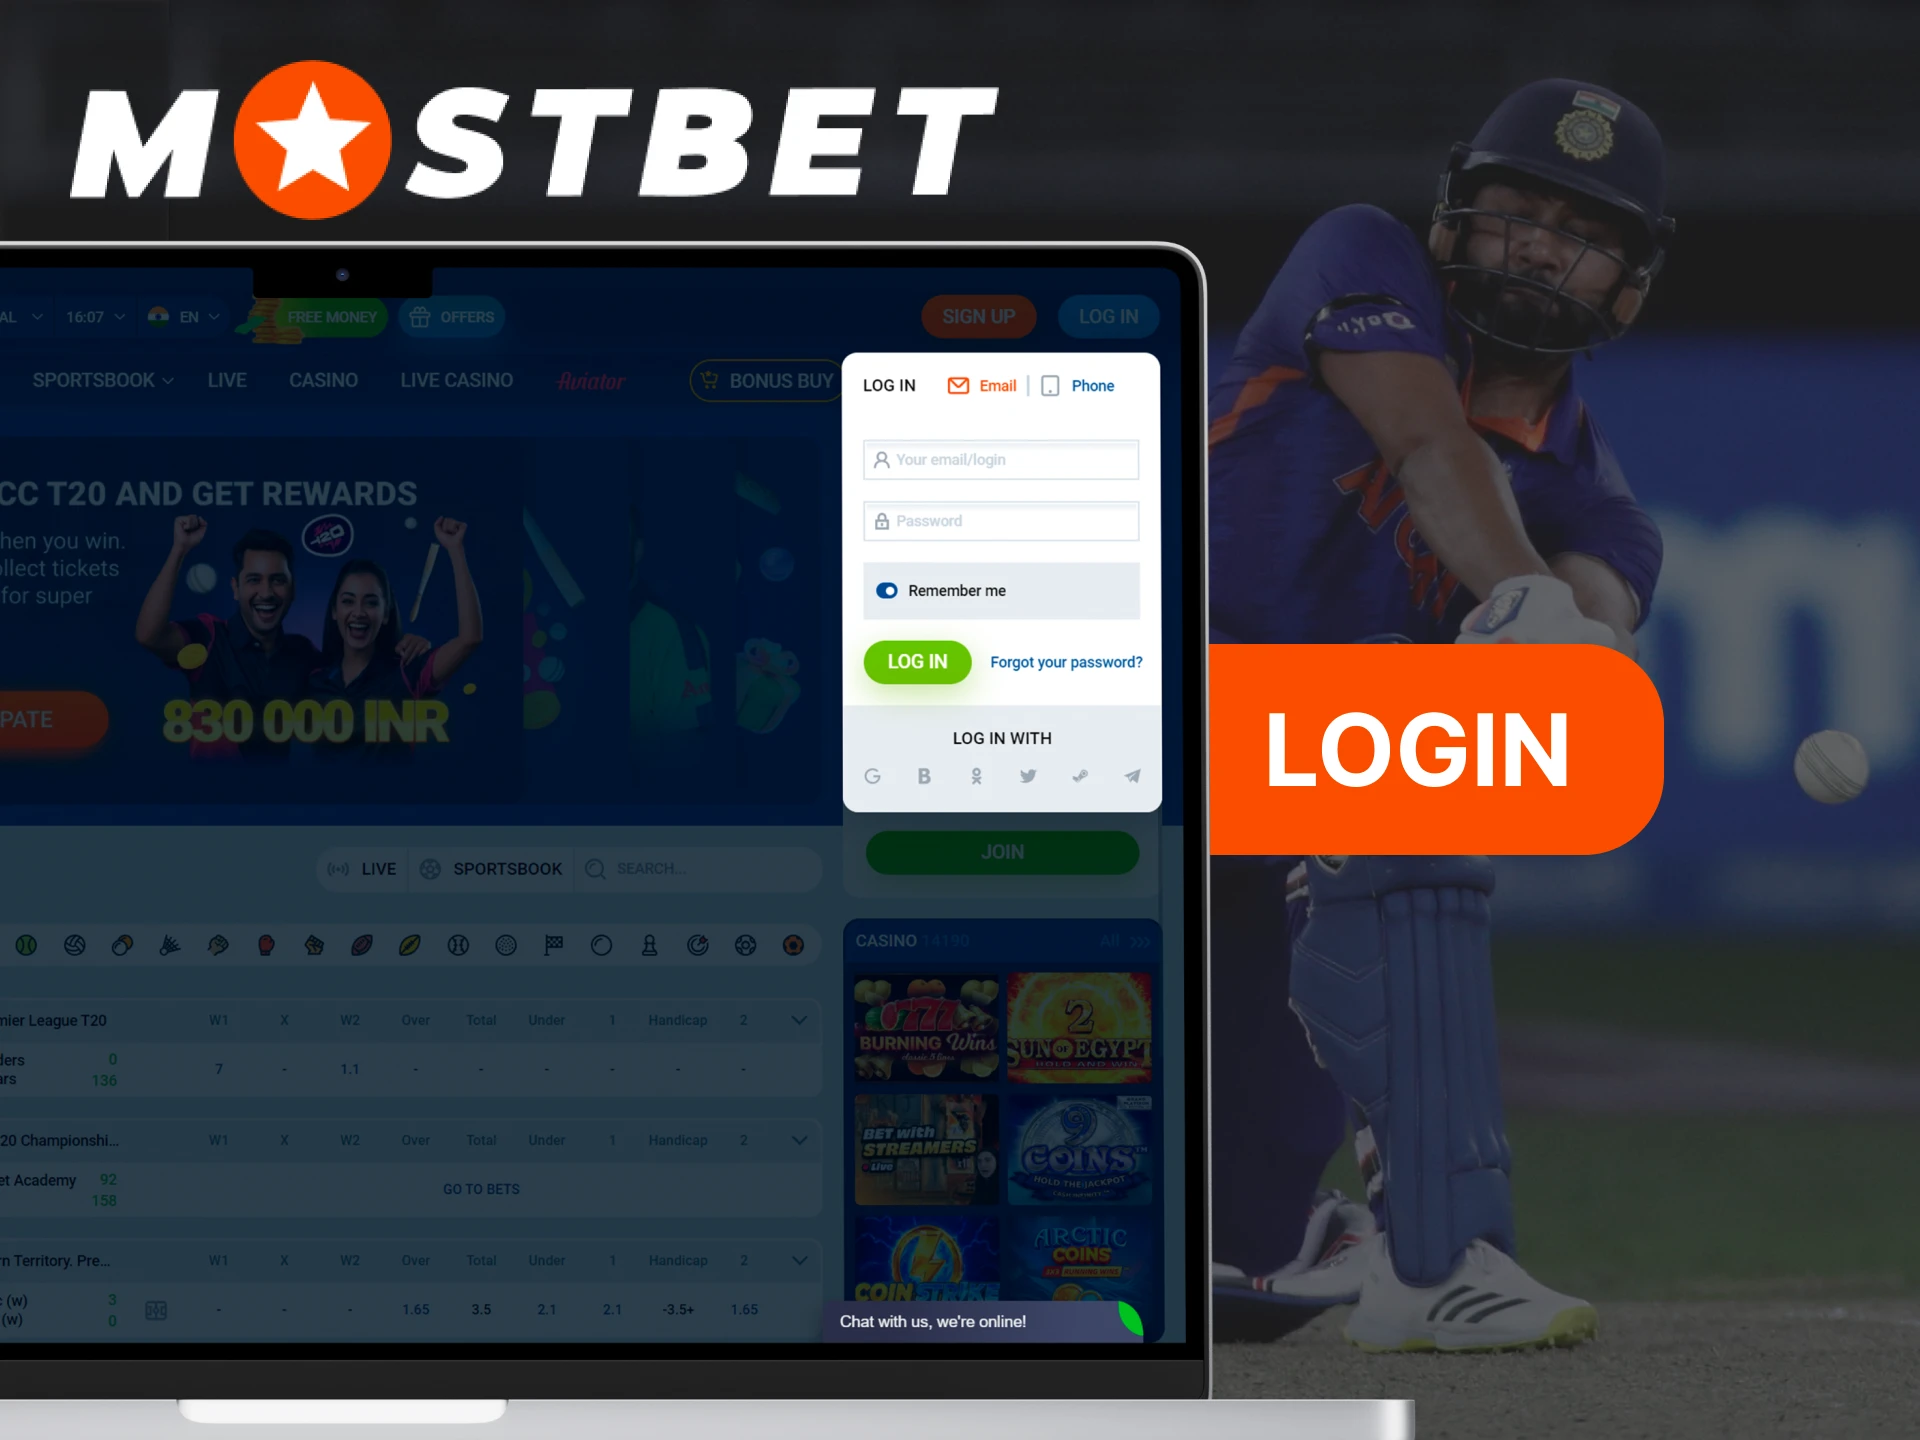 Log in to Mostbet in seconds and access your account.